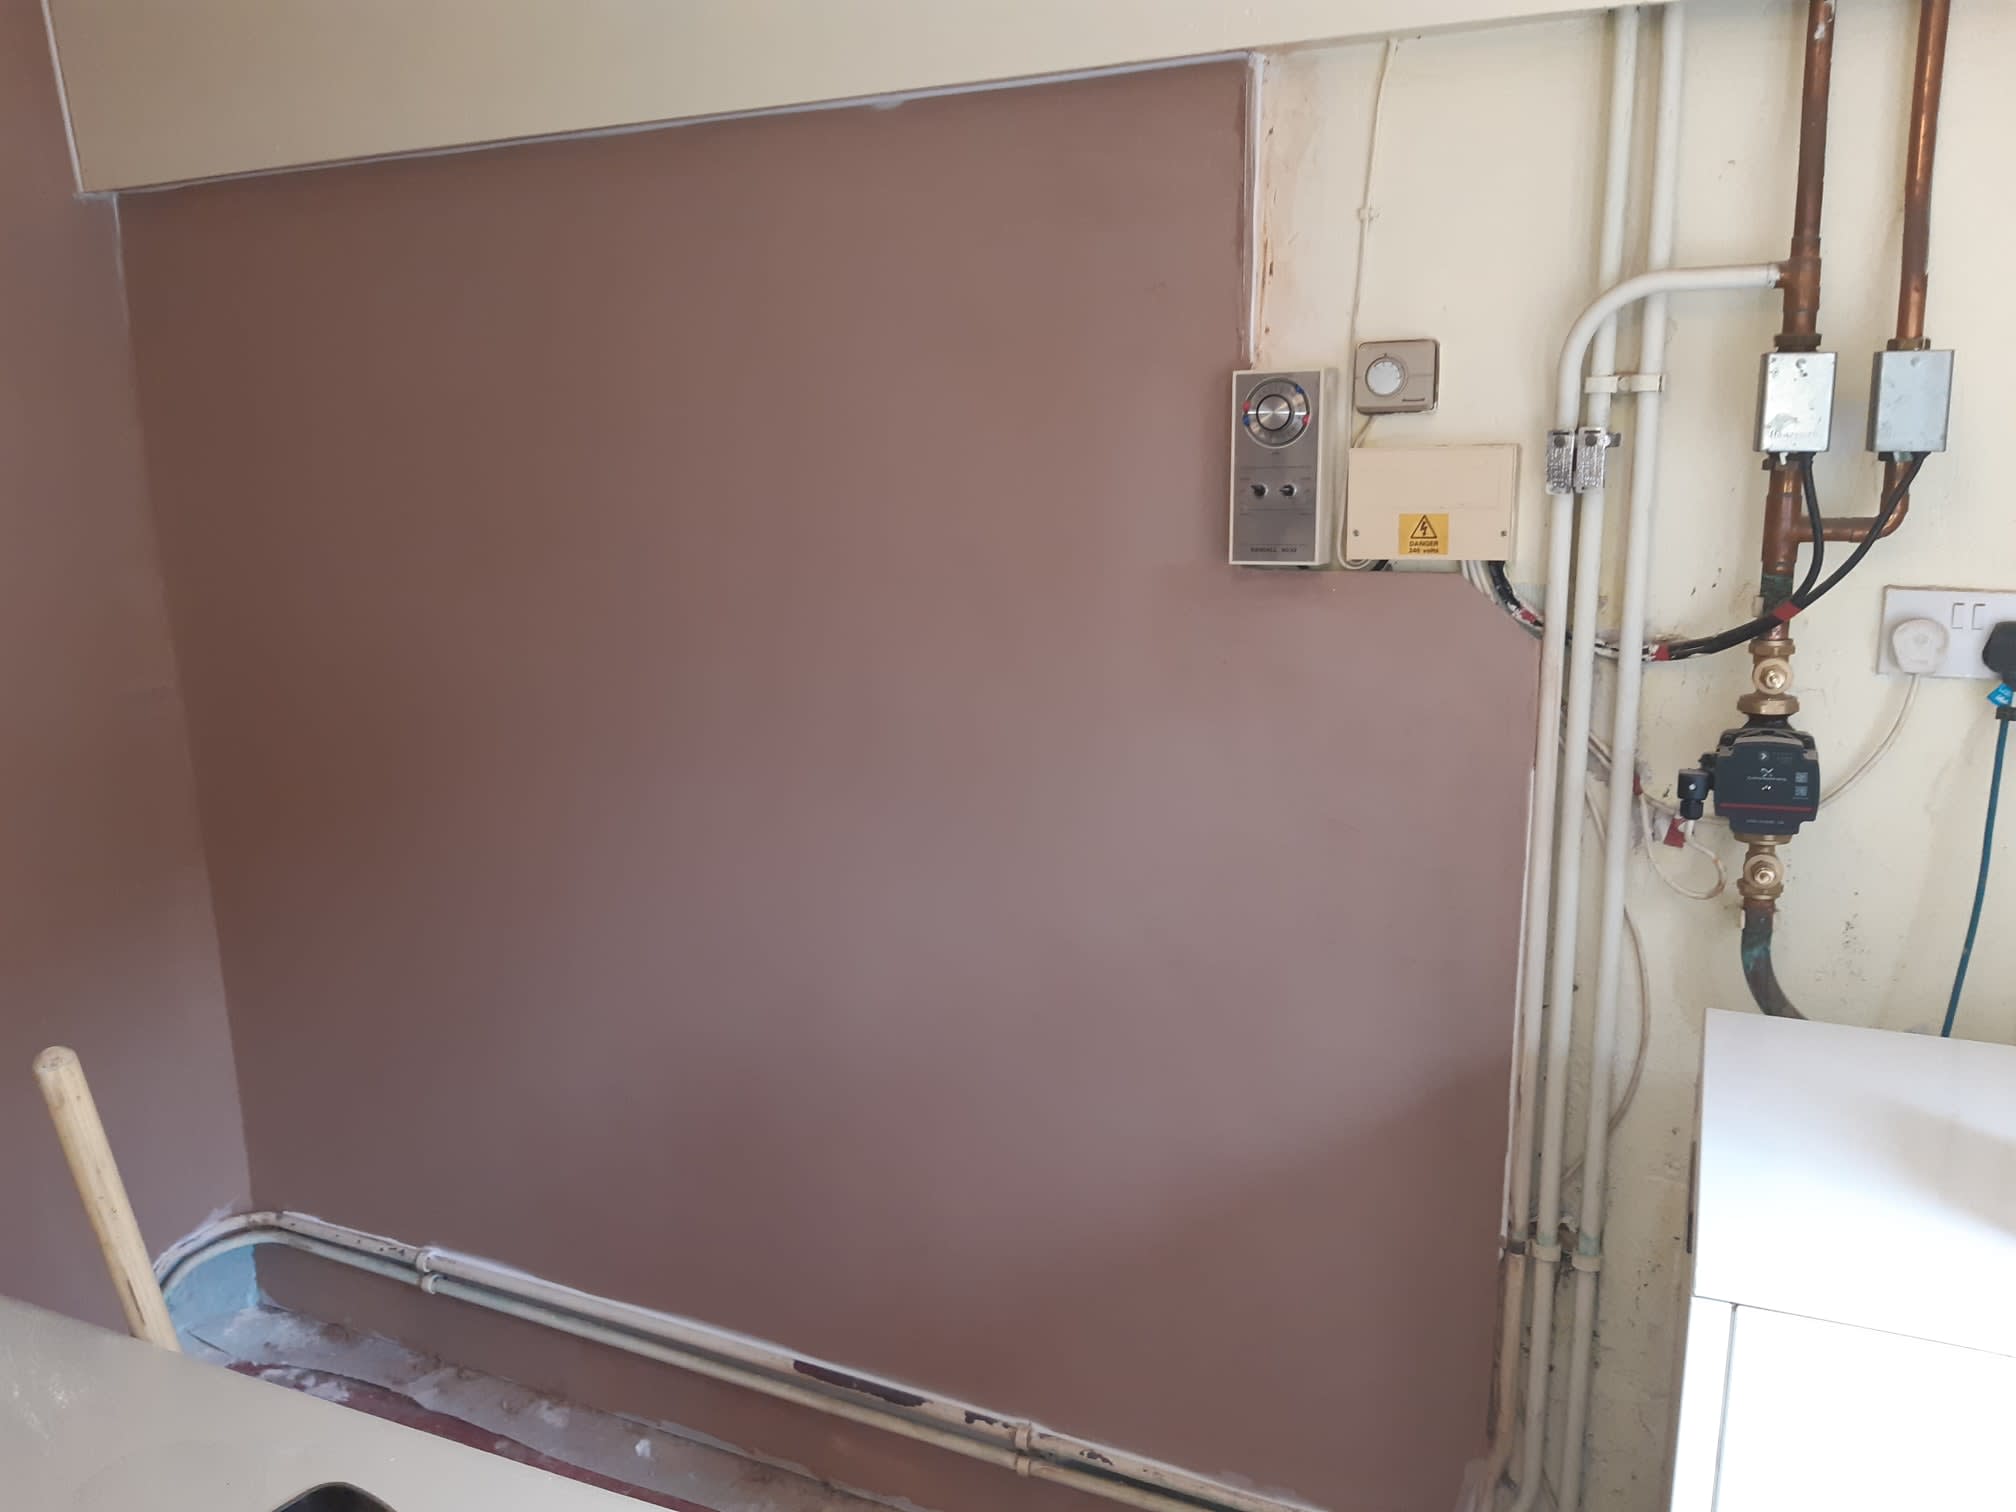 Images AC Plastering